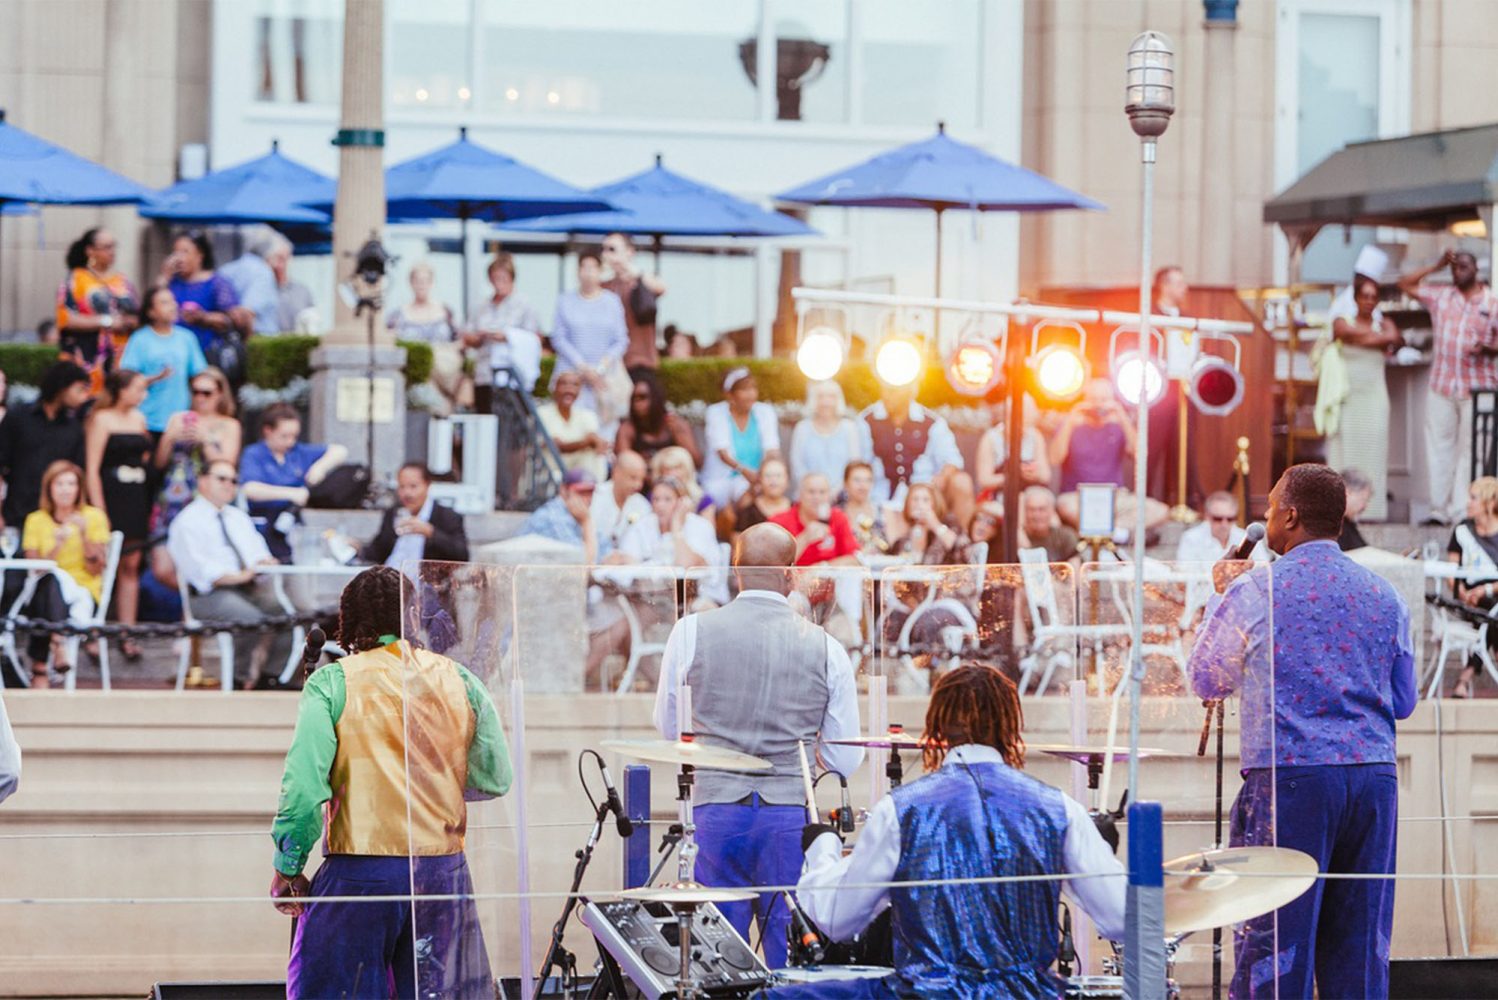 The Boston Harbor Hotel, home of the Harborwalk Terrace restaurant, is hosting live music during its Summer in the City events. Photo courtesy of the Boston Harbor Hotel. In this photo a band of men in blue and white shirts play for a crowd near Boston Harbor